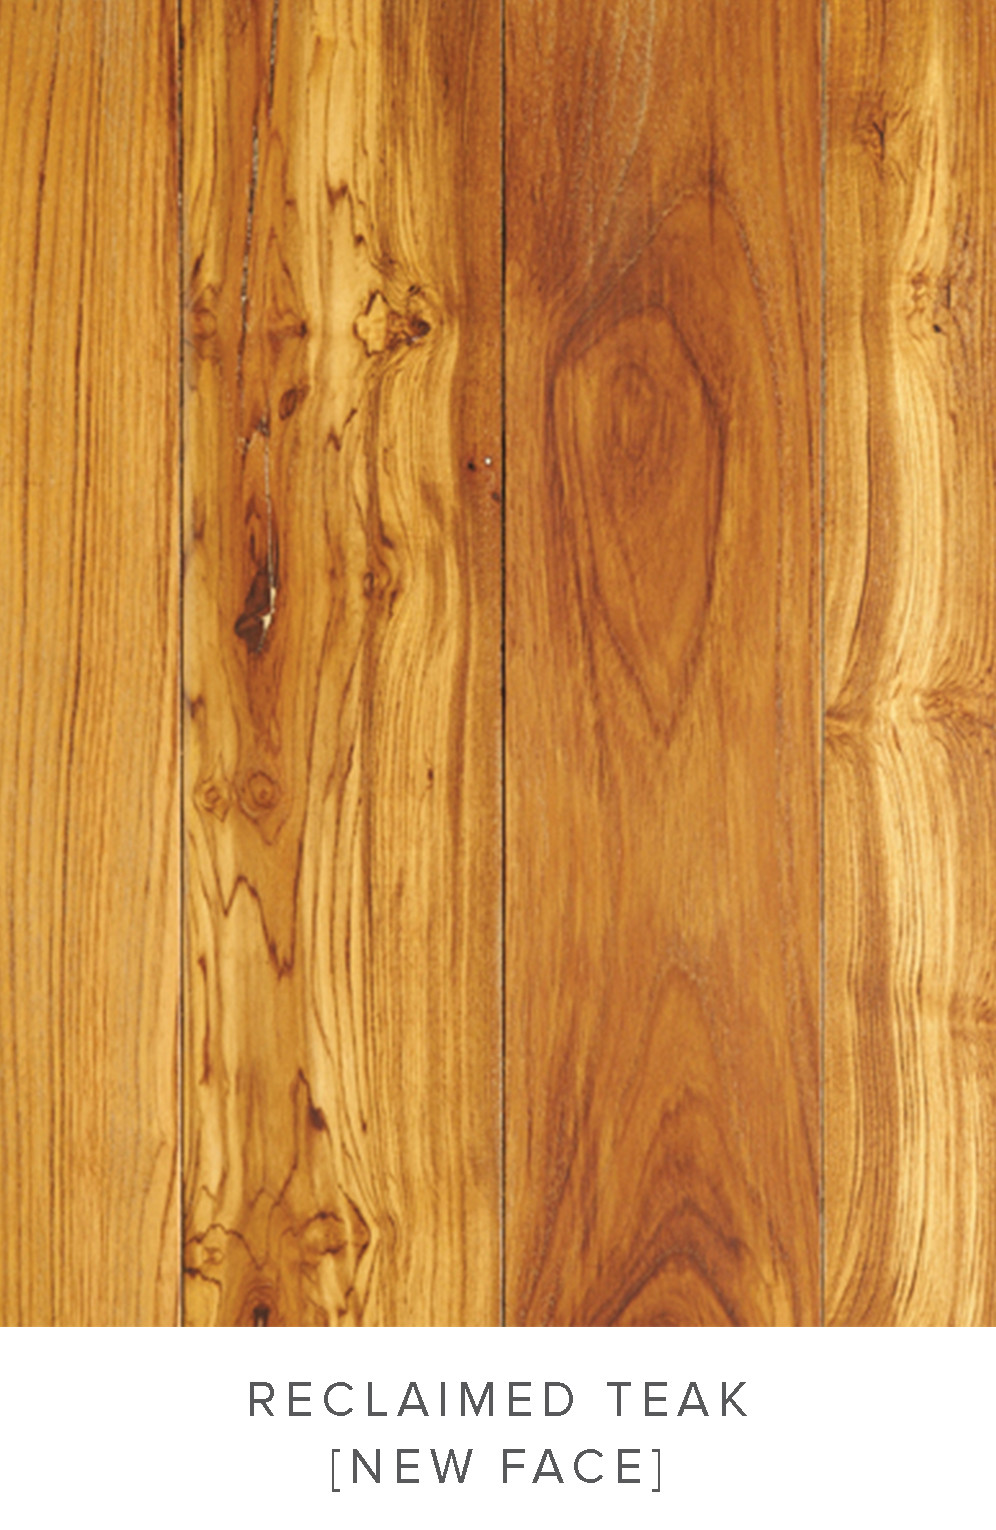 29 Popular Hardwood Flooring York Pa 2024 free download hardwood flooring york pa of extensive range of reclaimed wood flooring all under one roof at the in reclaimed teak new face